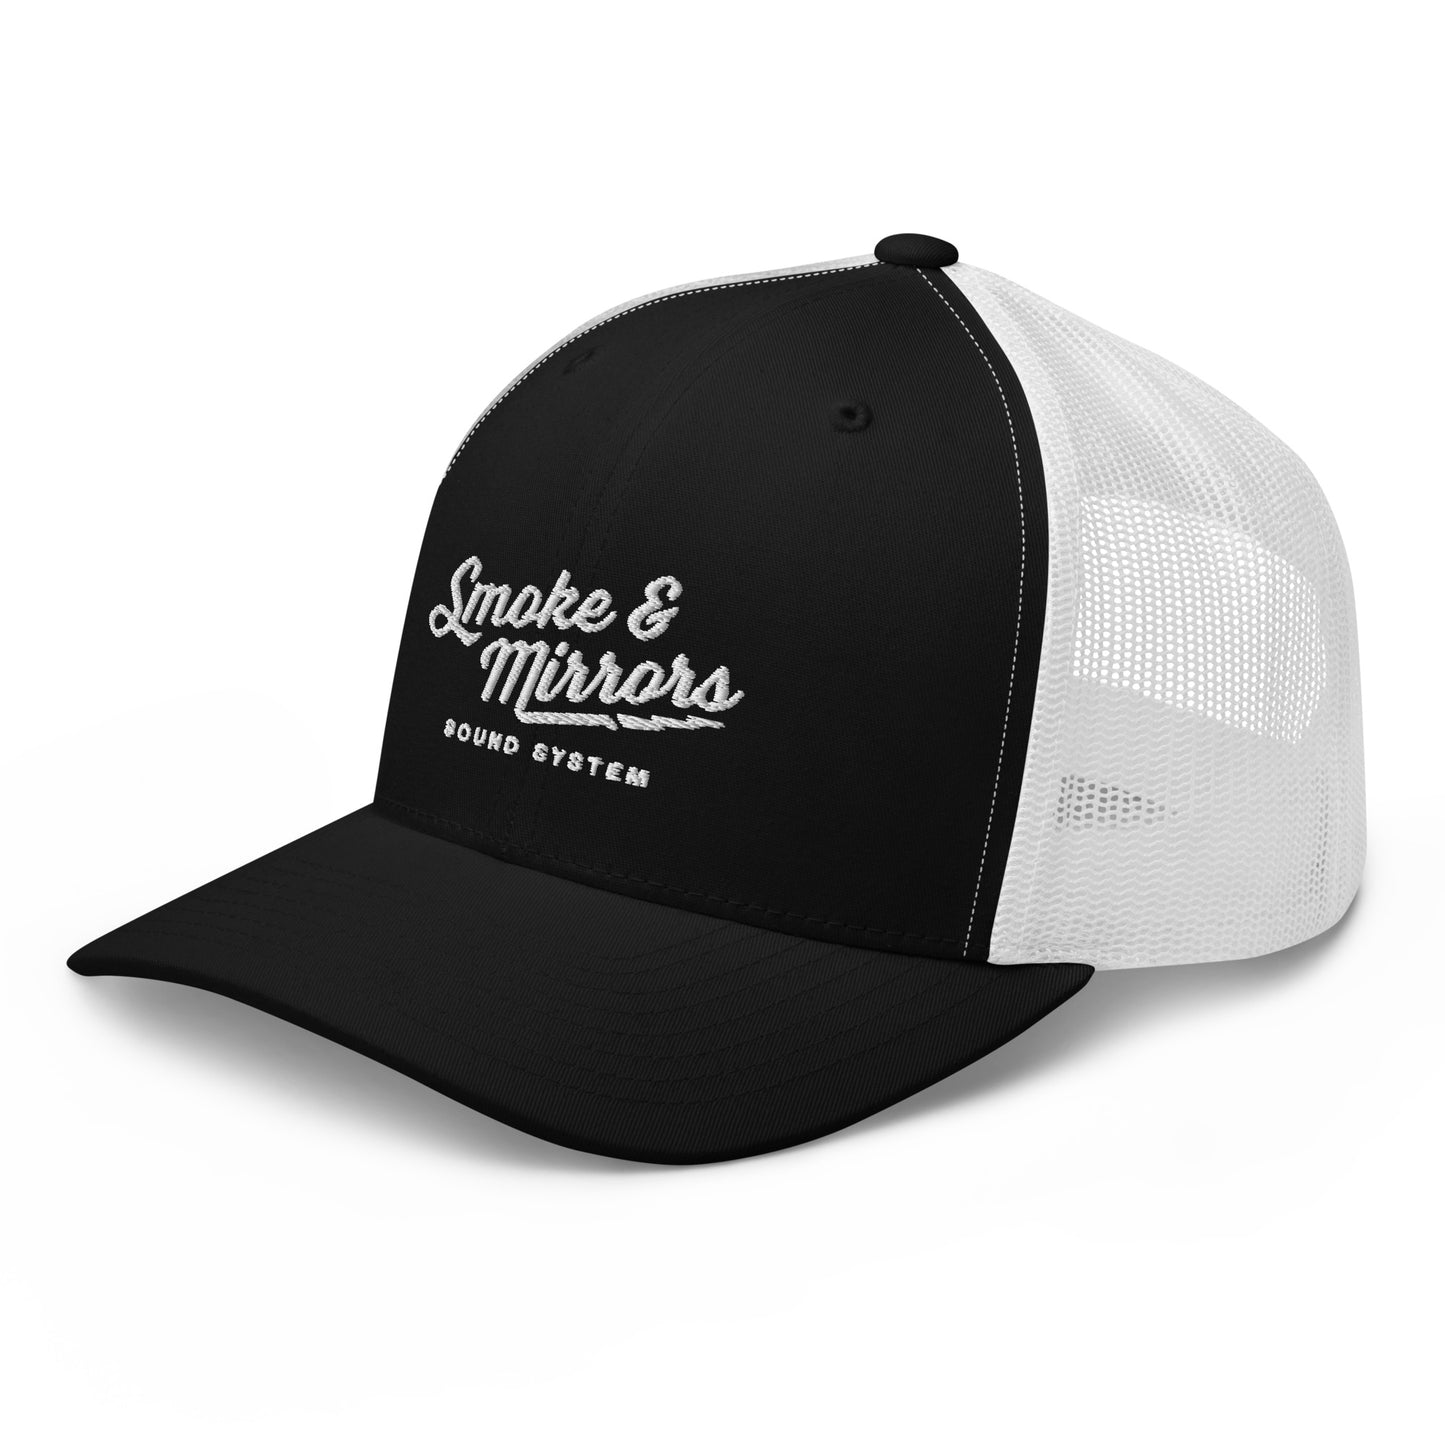 Smoke and Mirrors Sound System - Trucker Cap - Bolt